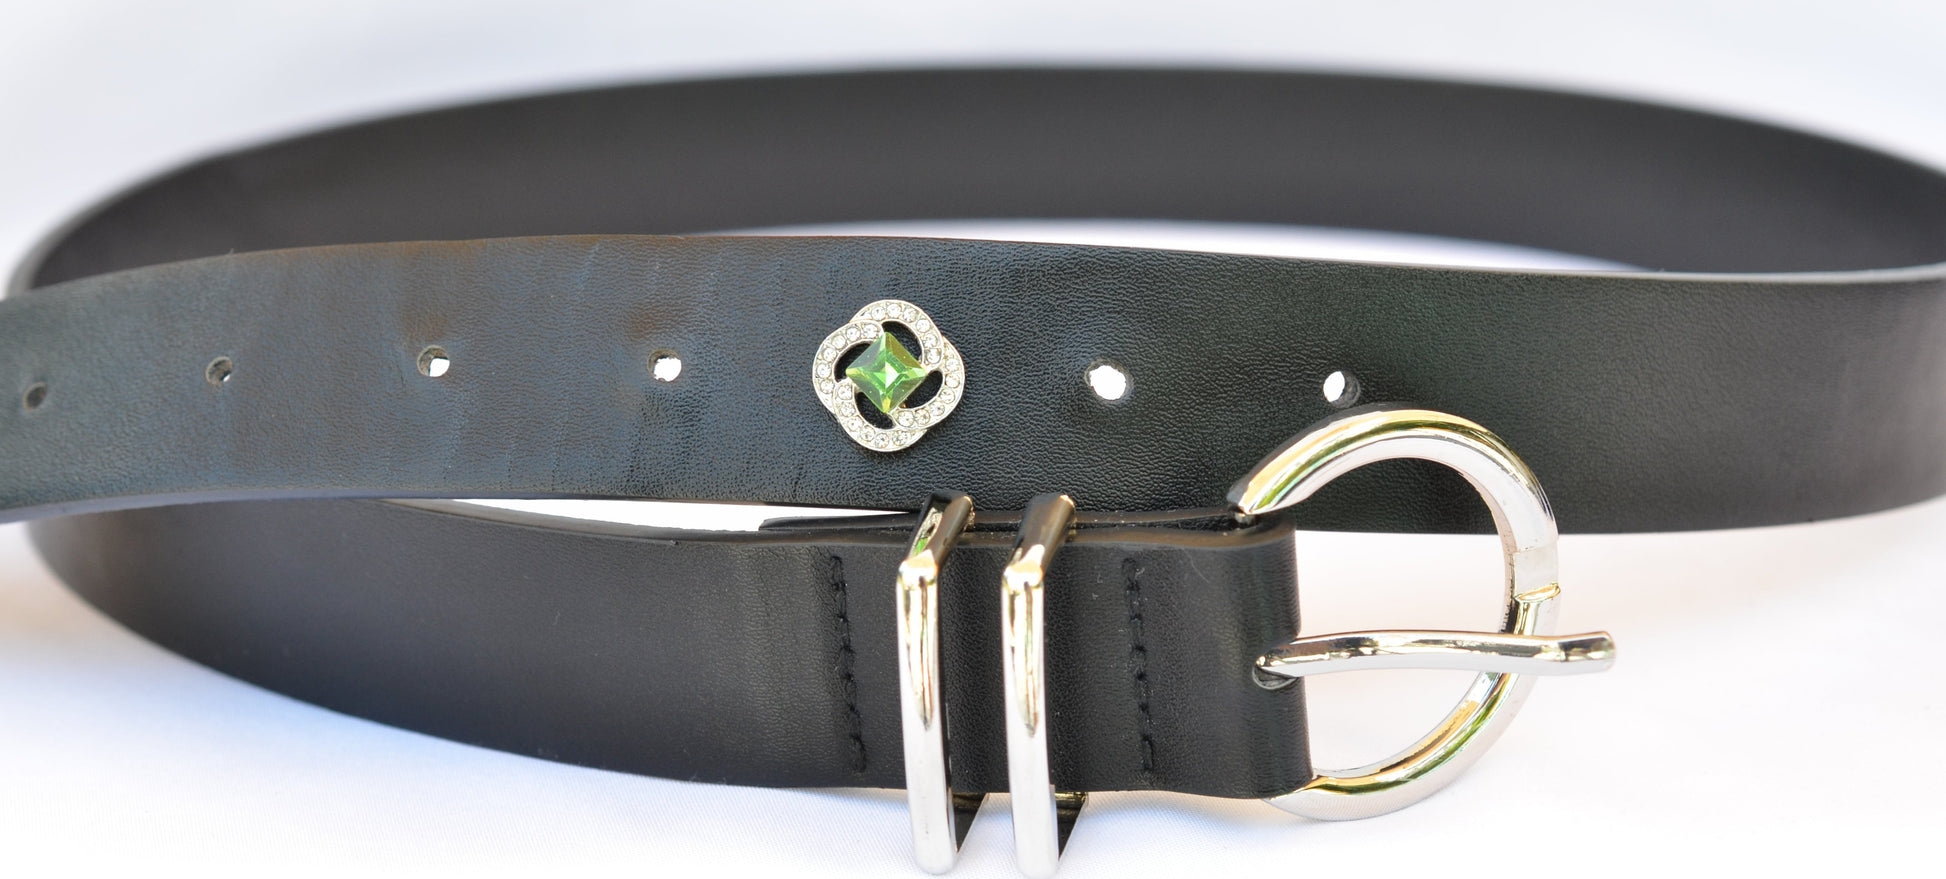 Green Square Stone Belt, Bag and Watch Band Charm